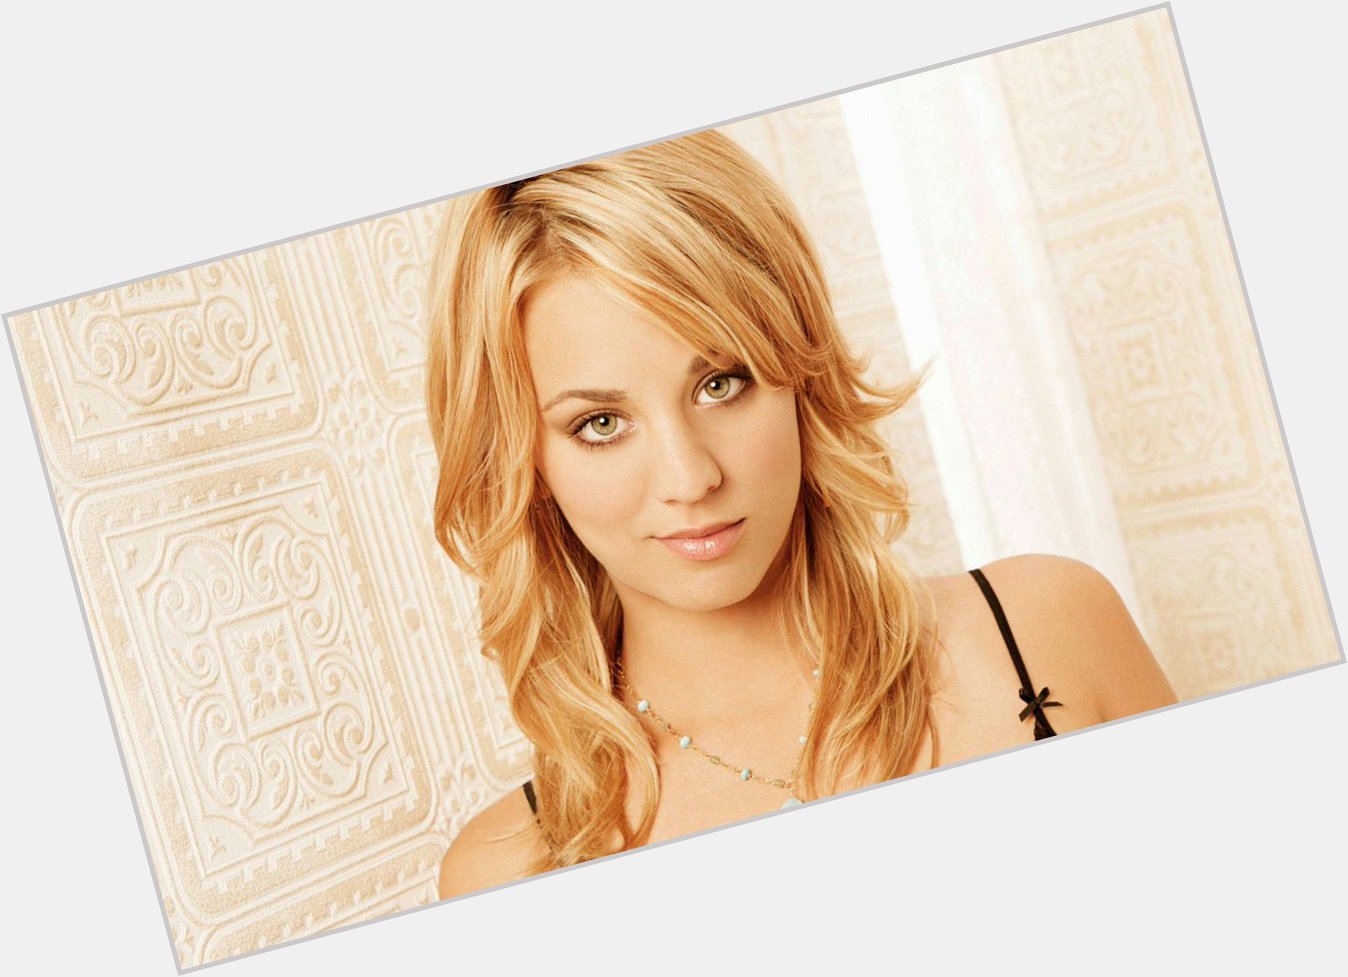 Happy Birthday Kaley Cuoco! Today in 1985 Penny from The Big Bang Theory, is born in Camarillo, California. 